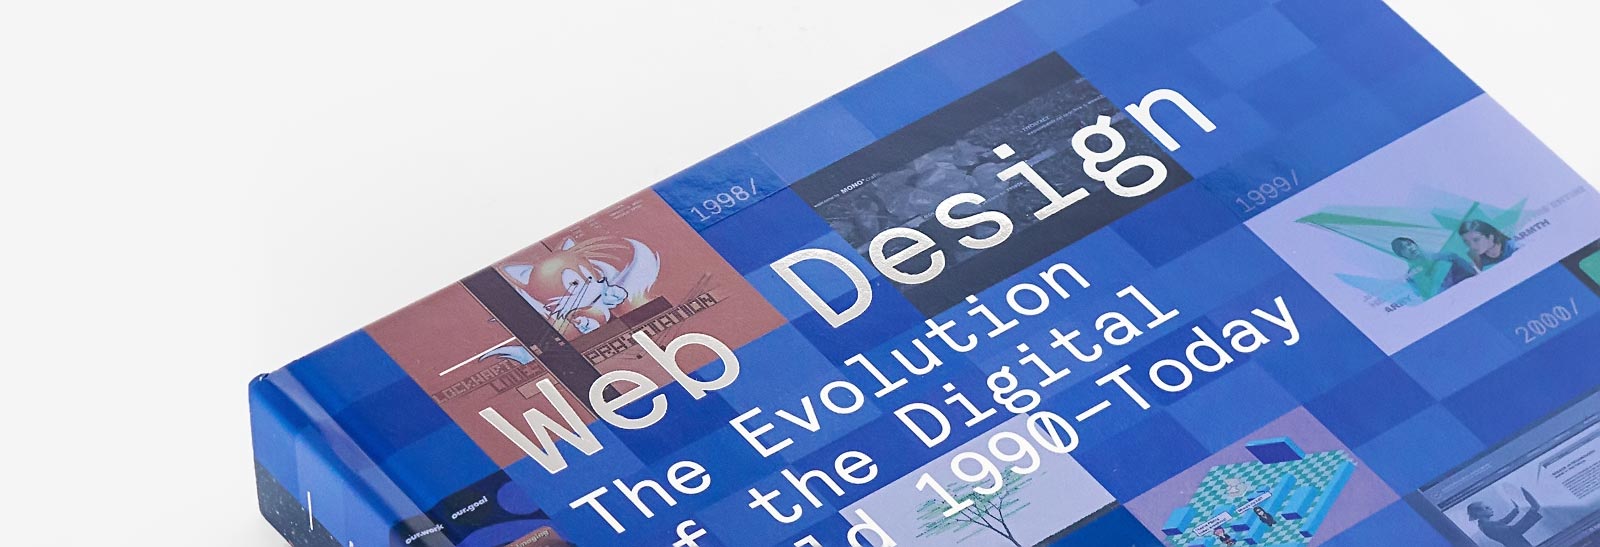 Web Design. The Evolution of the Digital World 1990 – Today